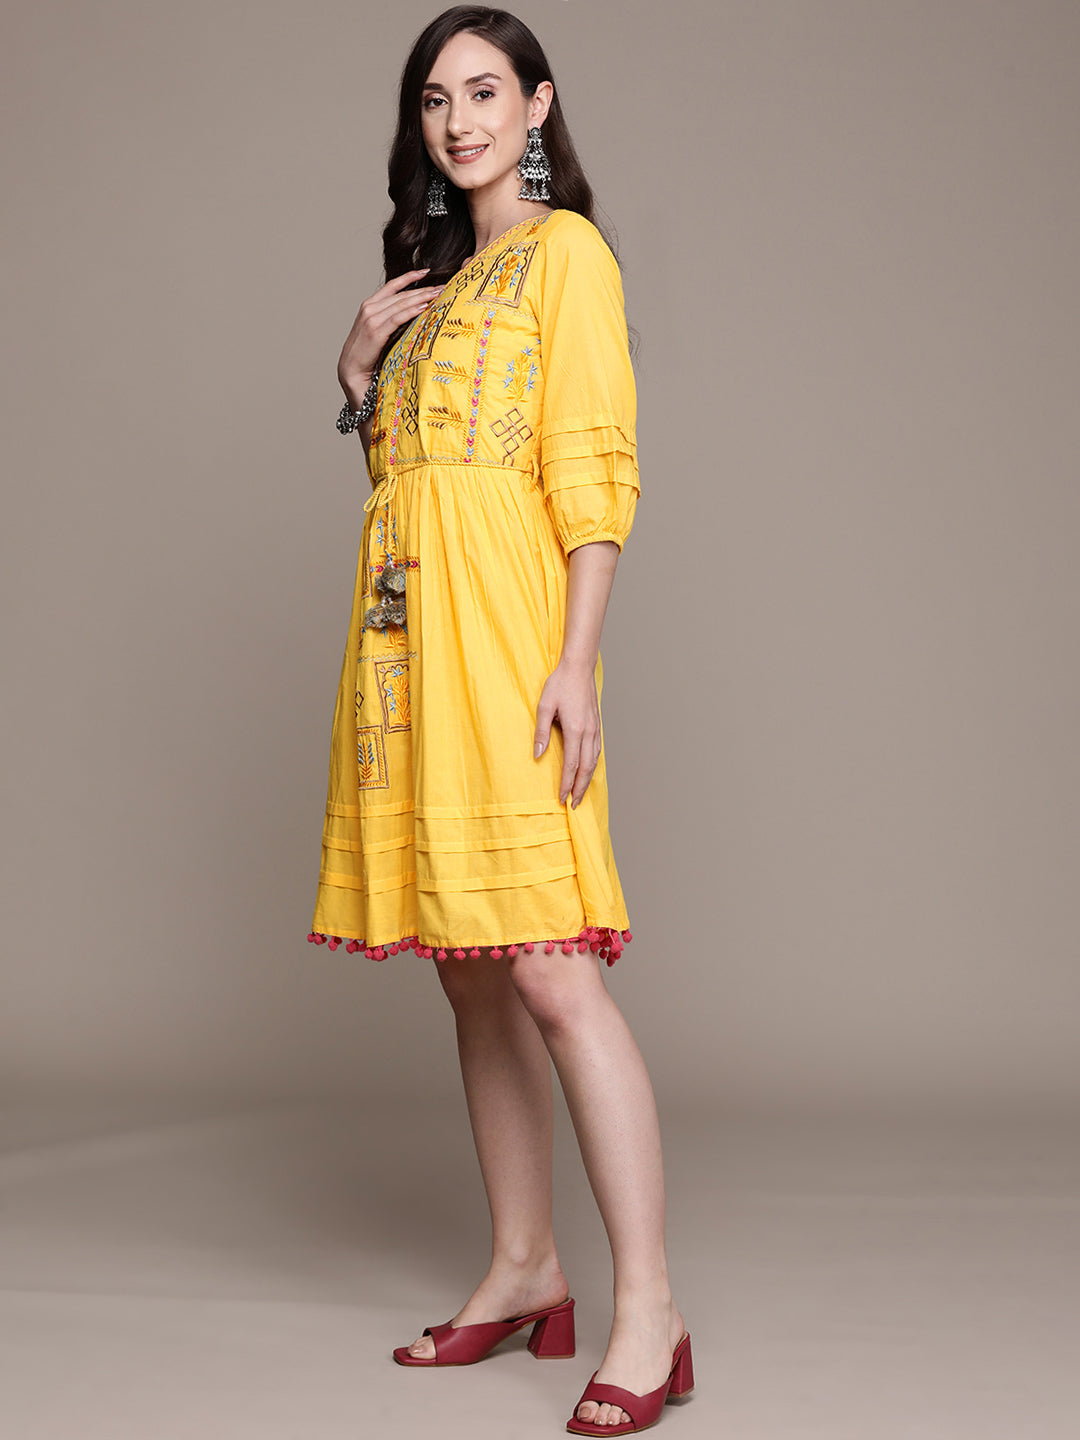 Ishin Women's Yellow Embroidered A-Line Dress